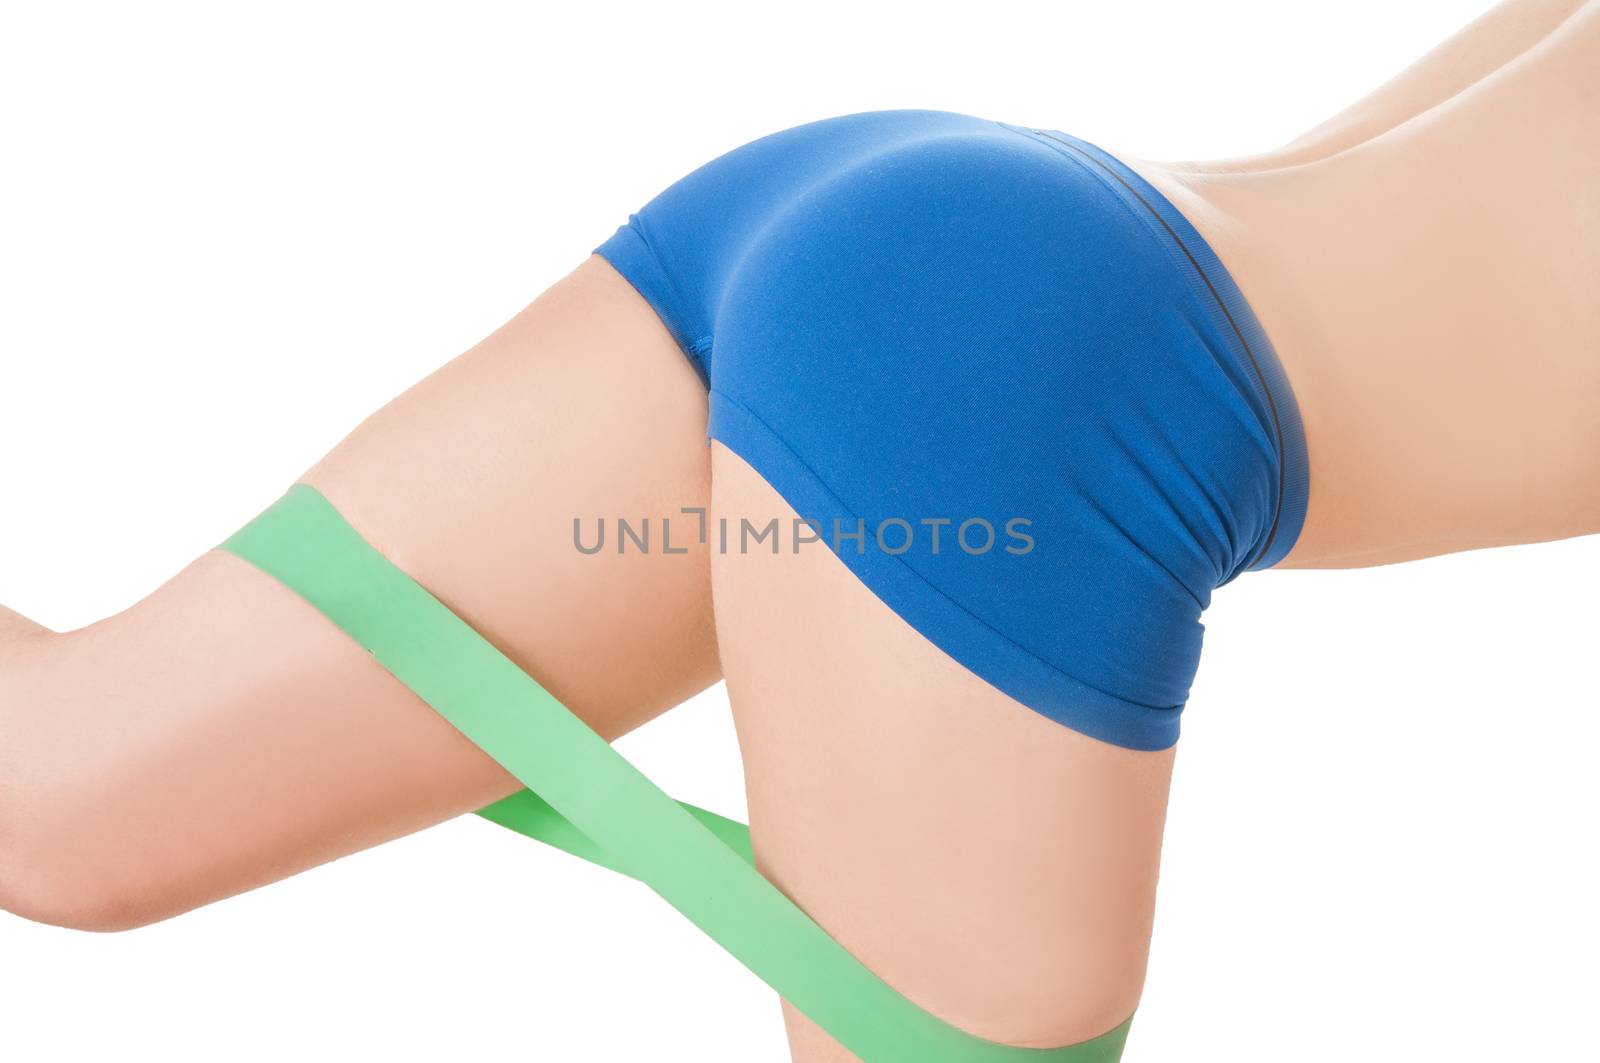 Fittness woman exercising with greenelastic rubber band wearing blue workout shorts